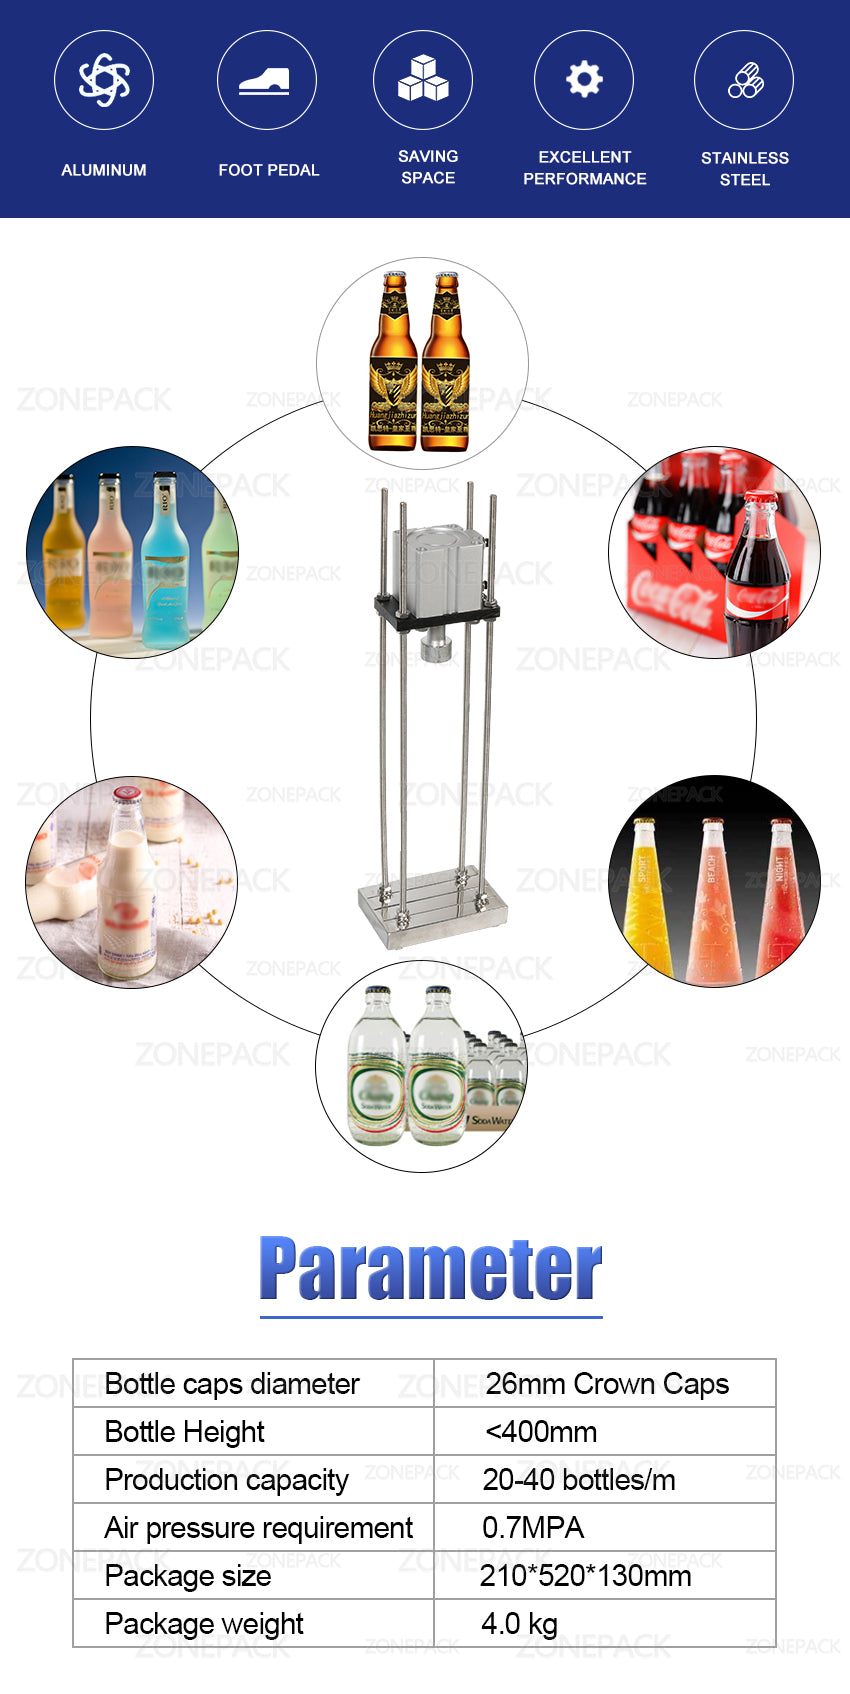 ZONEPACK Pneumatic Beer Capping Machine Semi-automatic Cap Sealing Machine Manual Bottle Capper Commercial Bar Brewery